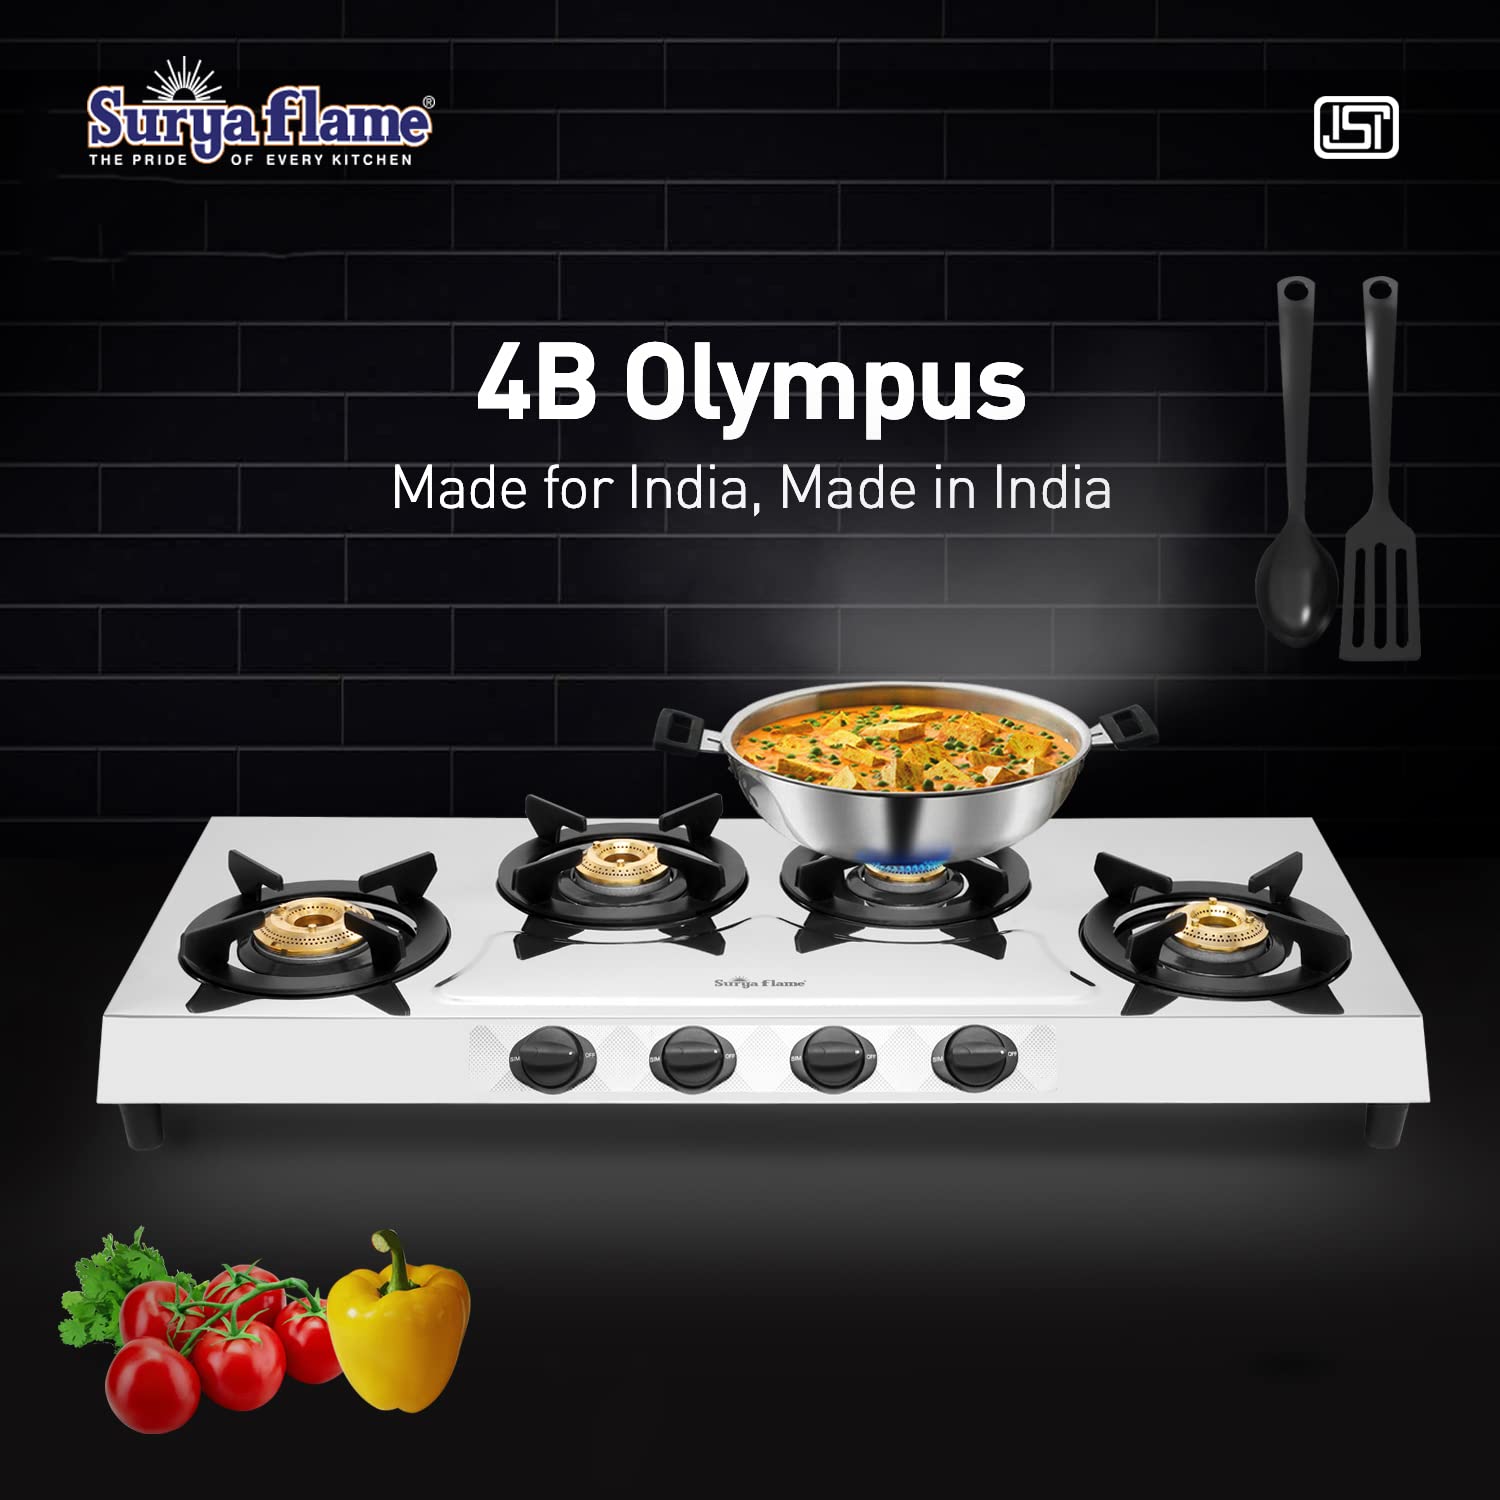 Surya Flame Olympus Gas Stove LPG Stove with Stainless Steel Pan Support Anti Skid Rubber Legs - 2 Years Complete Doorstep Warranty (4 Burner, 2)